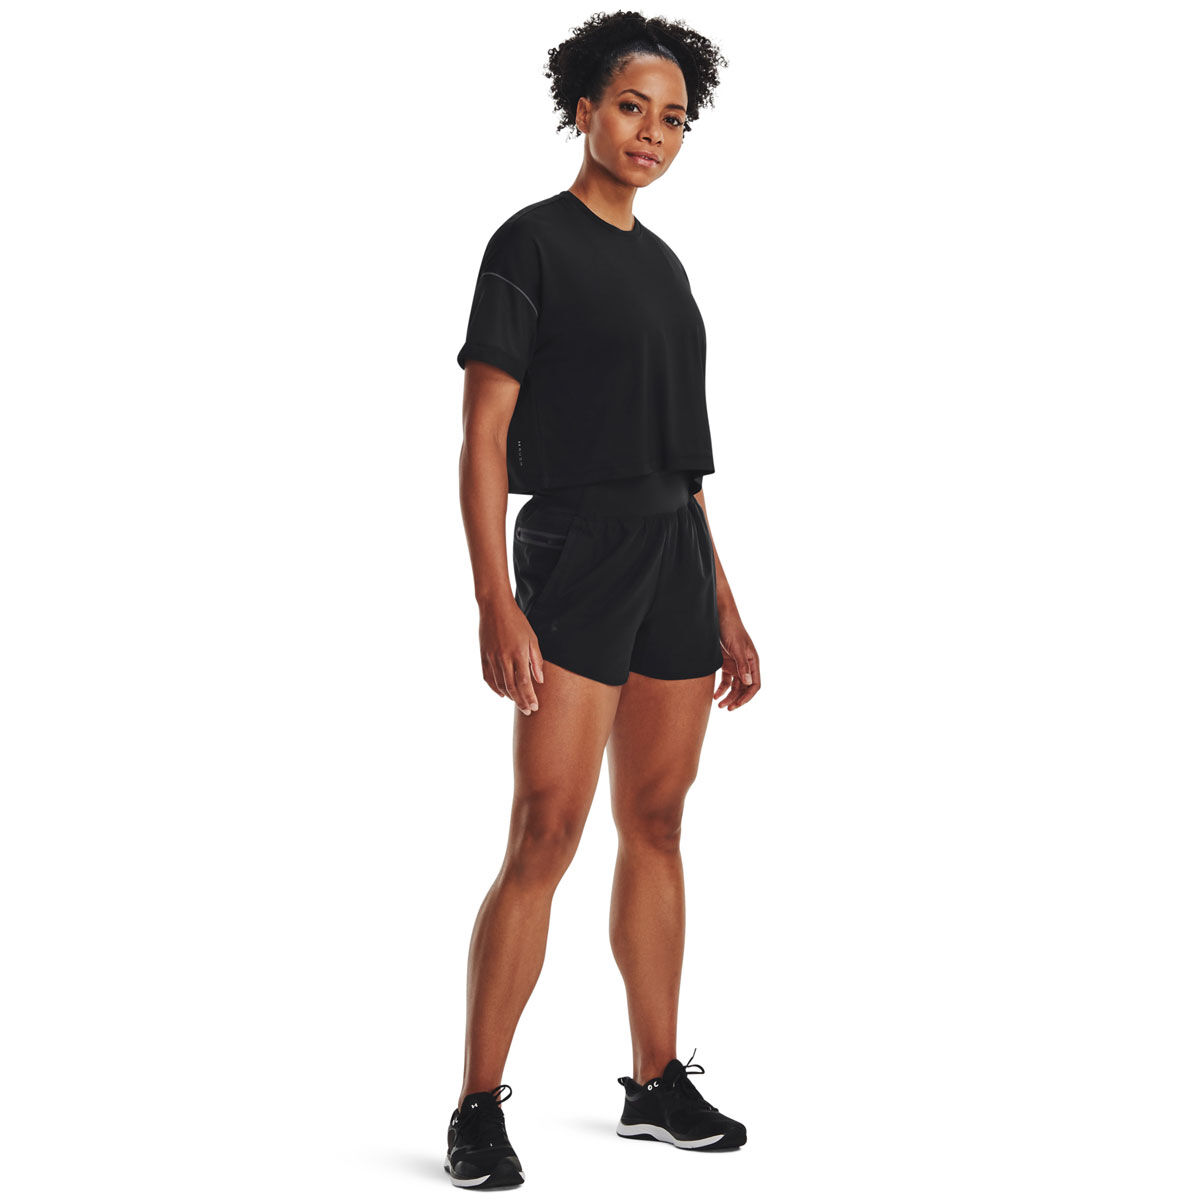 Under Armour, Shorts, Under Armour Size Md Elevated Woven 2 Shorts